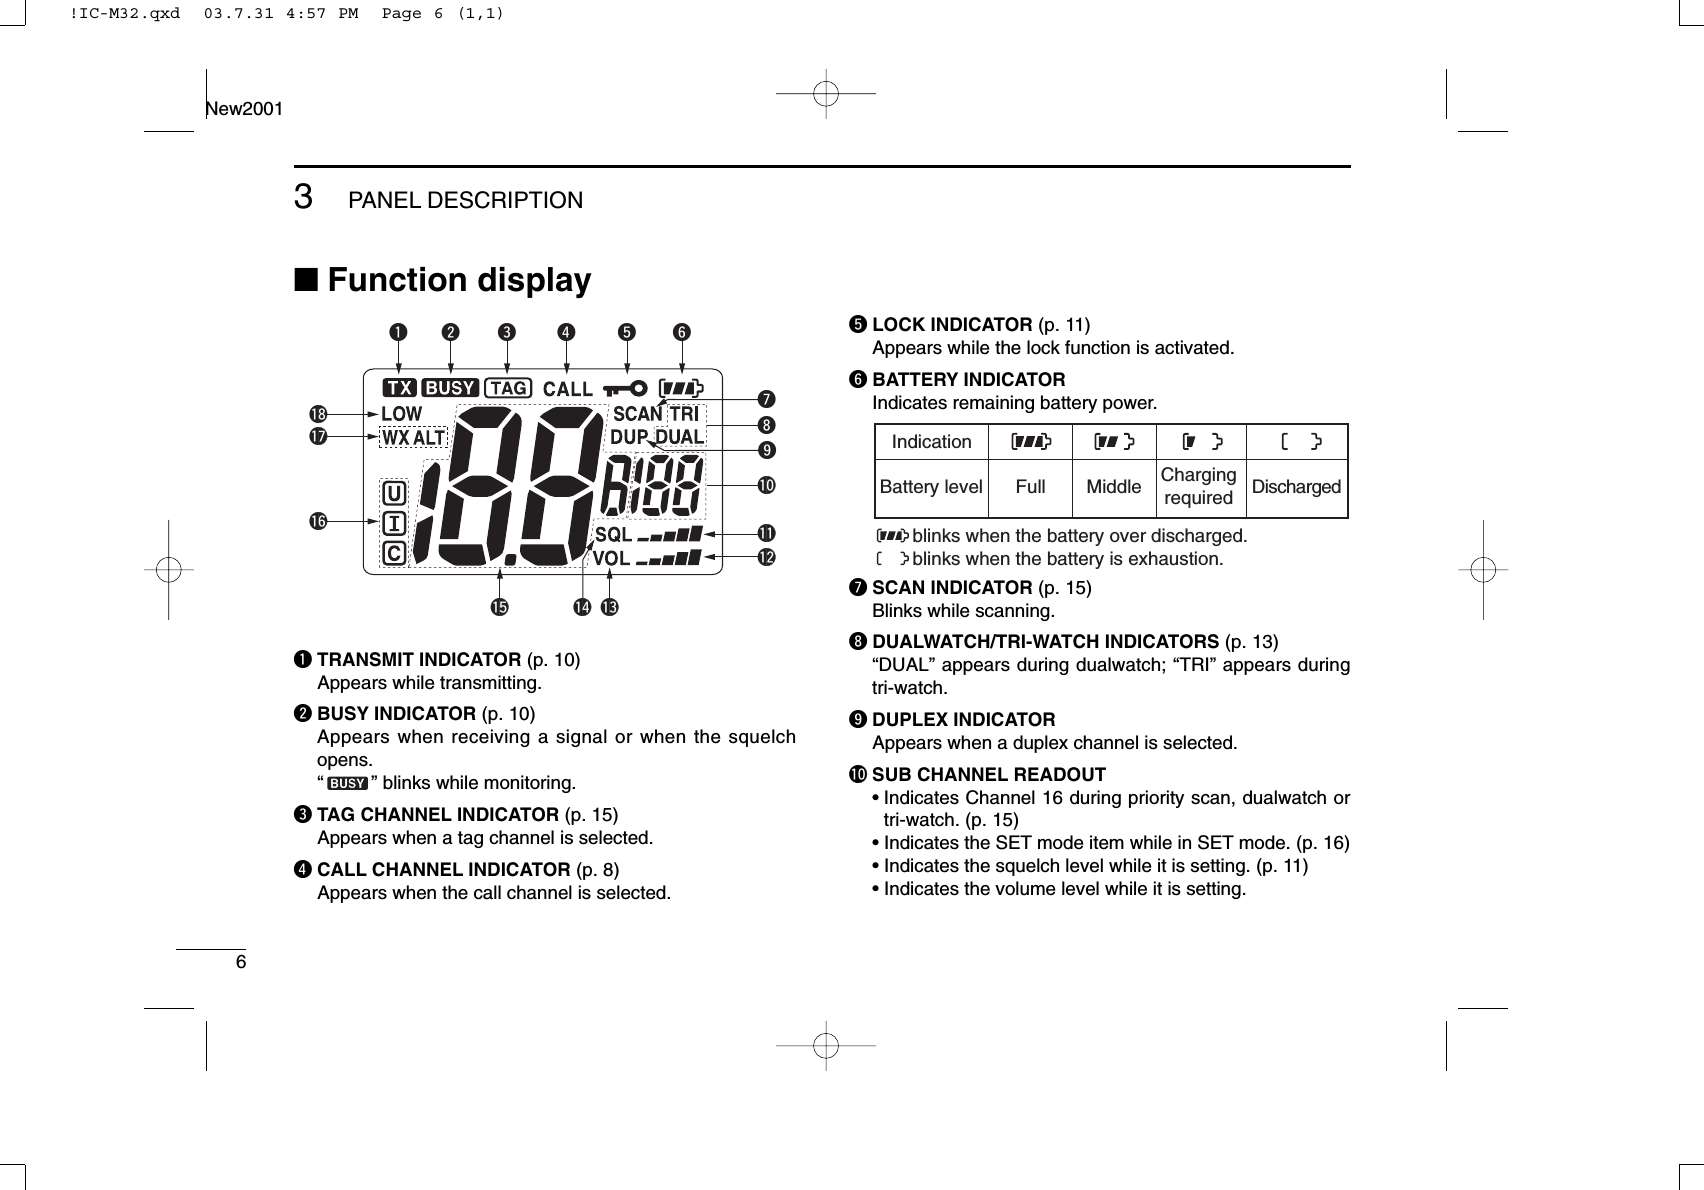 63PANEL DESCRIPTIONNew2001■Function displayqTRANSMIT INDICATOR (p. 10)Appears while transmitting.wBUSY INDICATOR (p. 10)Appears when receiving a signal or when the squelchopens.“” blinks while monitoring.eTAG CHANNEL INDICATOR (p. 15)Appears when a tag channel is selected.rCALL CHANNEL INDICATOR (p. 8)Appears when the call channel is selected.tLOCK INDICATOR (p. 11)Appears while the lock function is activated.yBATTERY INDICATORIndicates remaining battery power.uSCAN INDICATOR (p. 15)Blinks while scanning.iDUALWATCH/TRI-WATCH INDICATORS (p. 13)“DUAL” appears during dualwatch; “TRI” appears duringtri-watch.oDUPLEX INDICATORAppears when a duplex channel is selected.!0 SUB CHANNEL READOUT• Indicates Channel 16 during priority scan, dualwatch ortri-watch. (p. 15)• Indicates the SET mode item while in SET mode. (p. 16)• Indicates the squelch level while it is setting. (p. 11)• Indicates the volume level while it is setting.IndicationFull Middle Chargingrequired DischargedBattery levelblinks when the battery is exhaustion.blinks when the battery over discharged.!8!6!7qer ytwiuo!2!1!0!5 !3!4!IC-M32.qxd  03.7.31 4:57 PM  Page 6 (1,1)